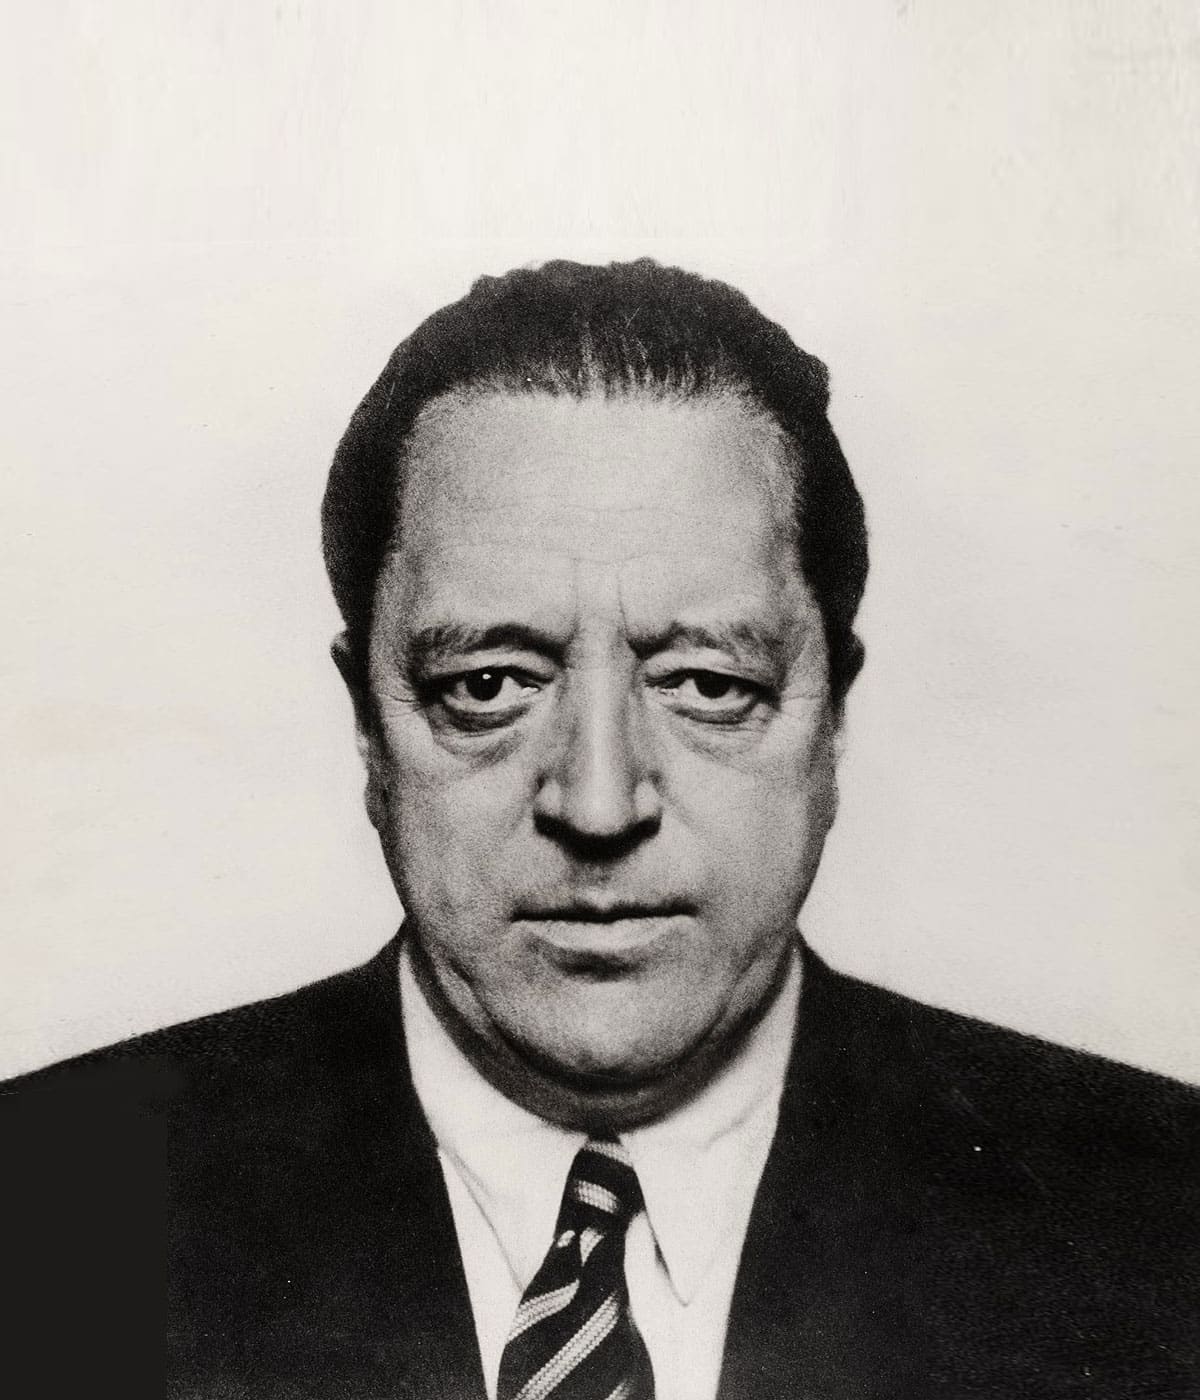 Mies van der Rohe: The Architect Of Cities Made From Steel and Glass